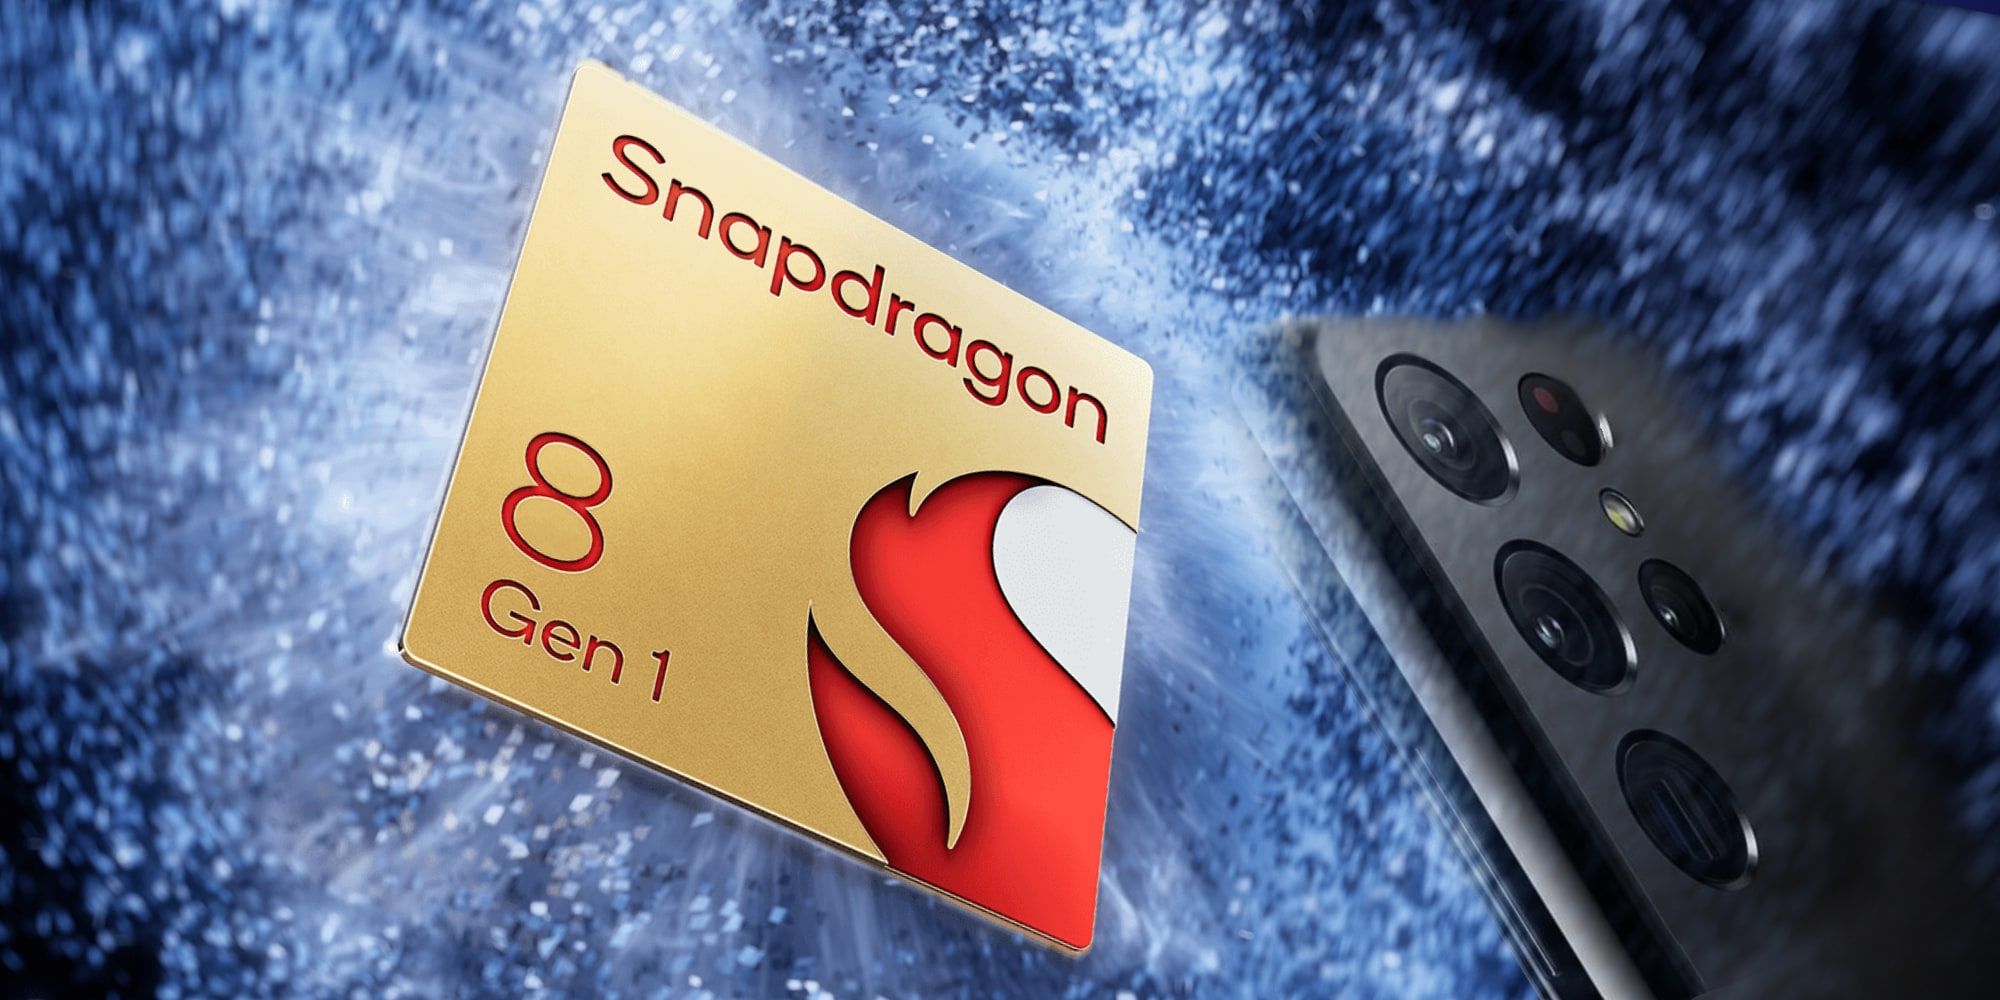 Qualcomm Snapdragon 8 Gen 1 With Samsung Galaxy S21 Ultra Superimposed And Faded